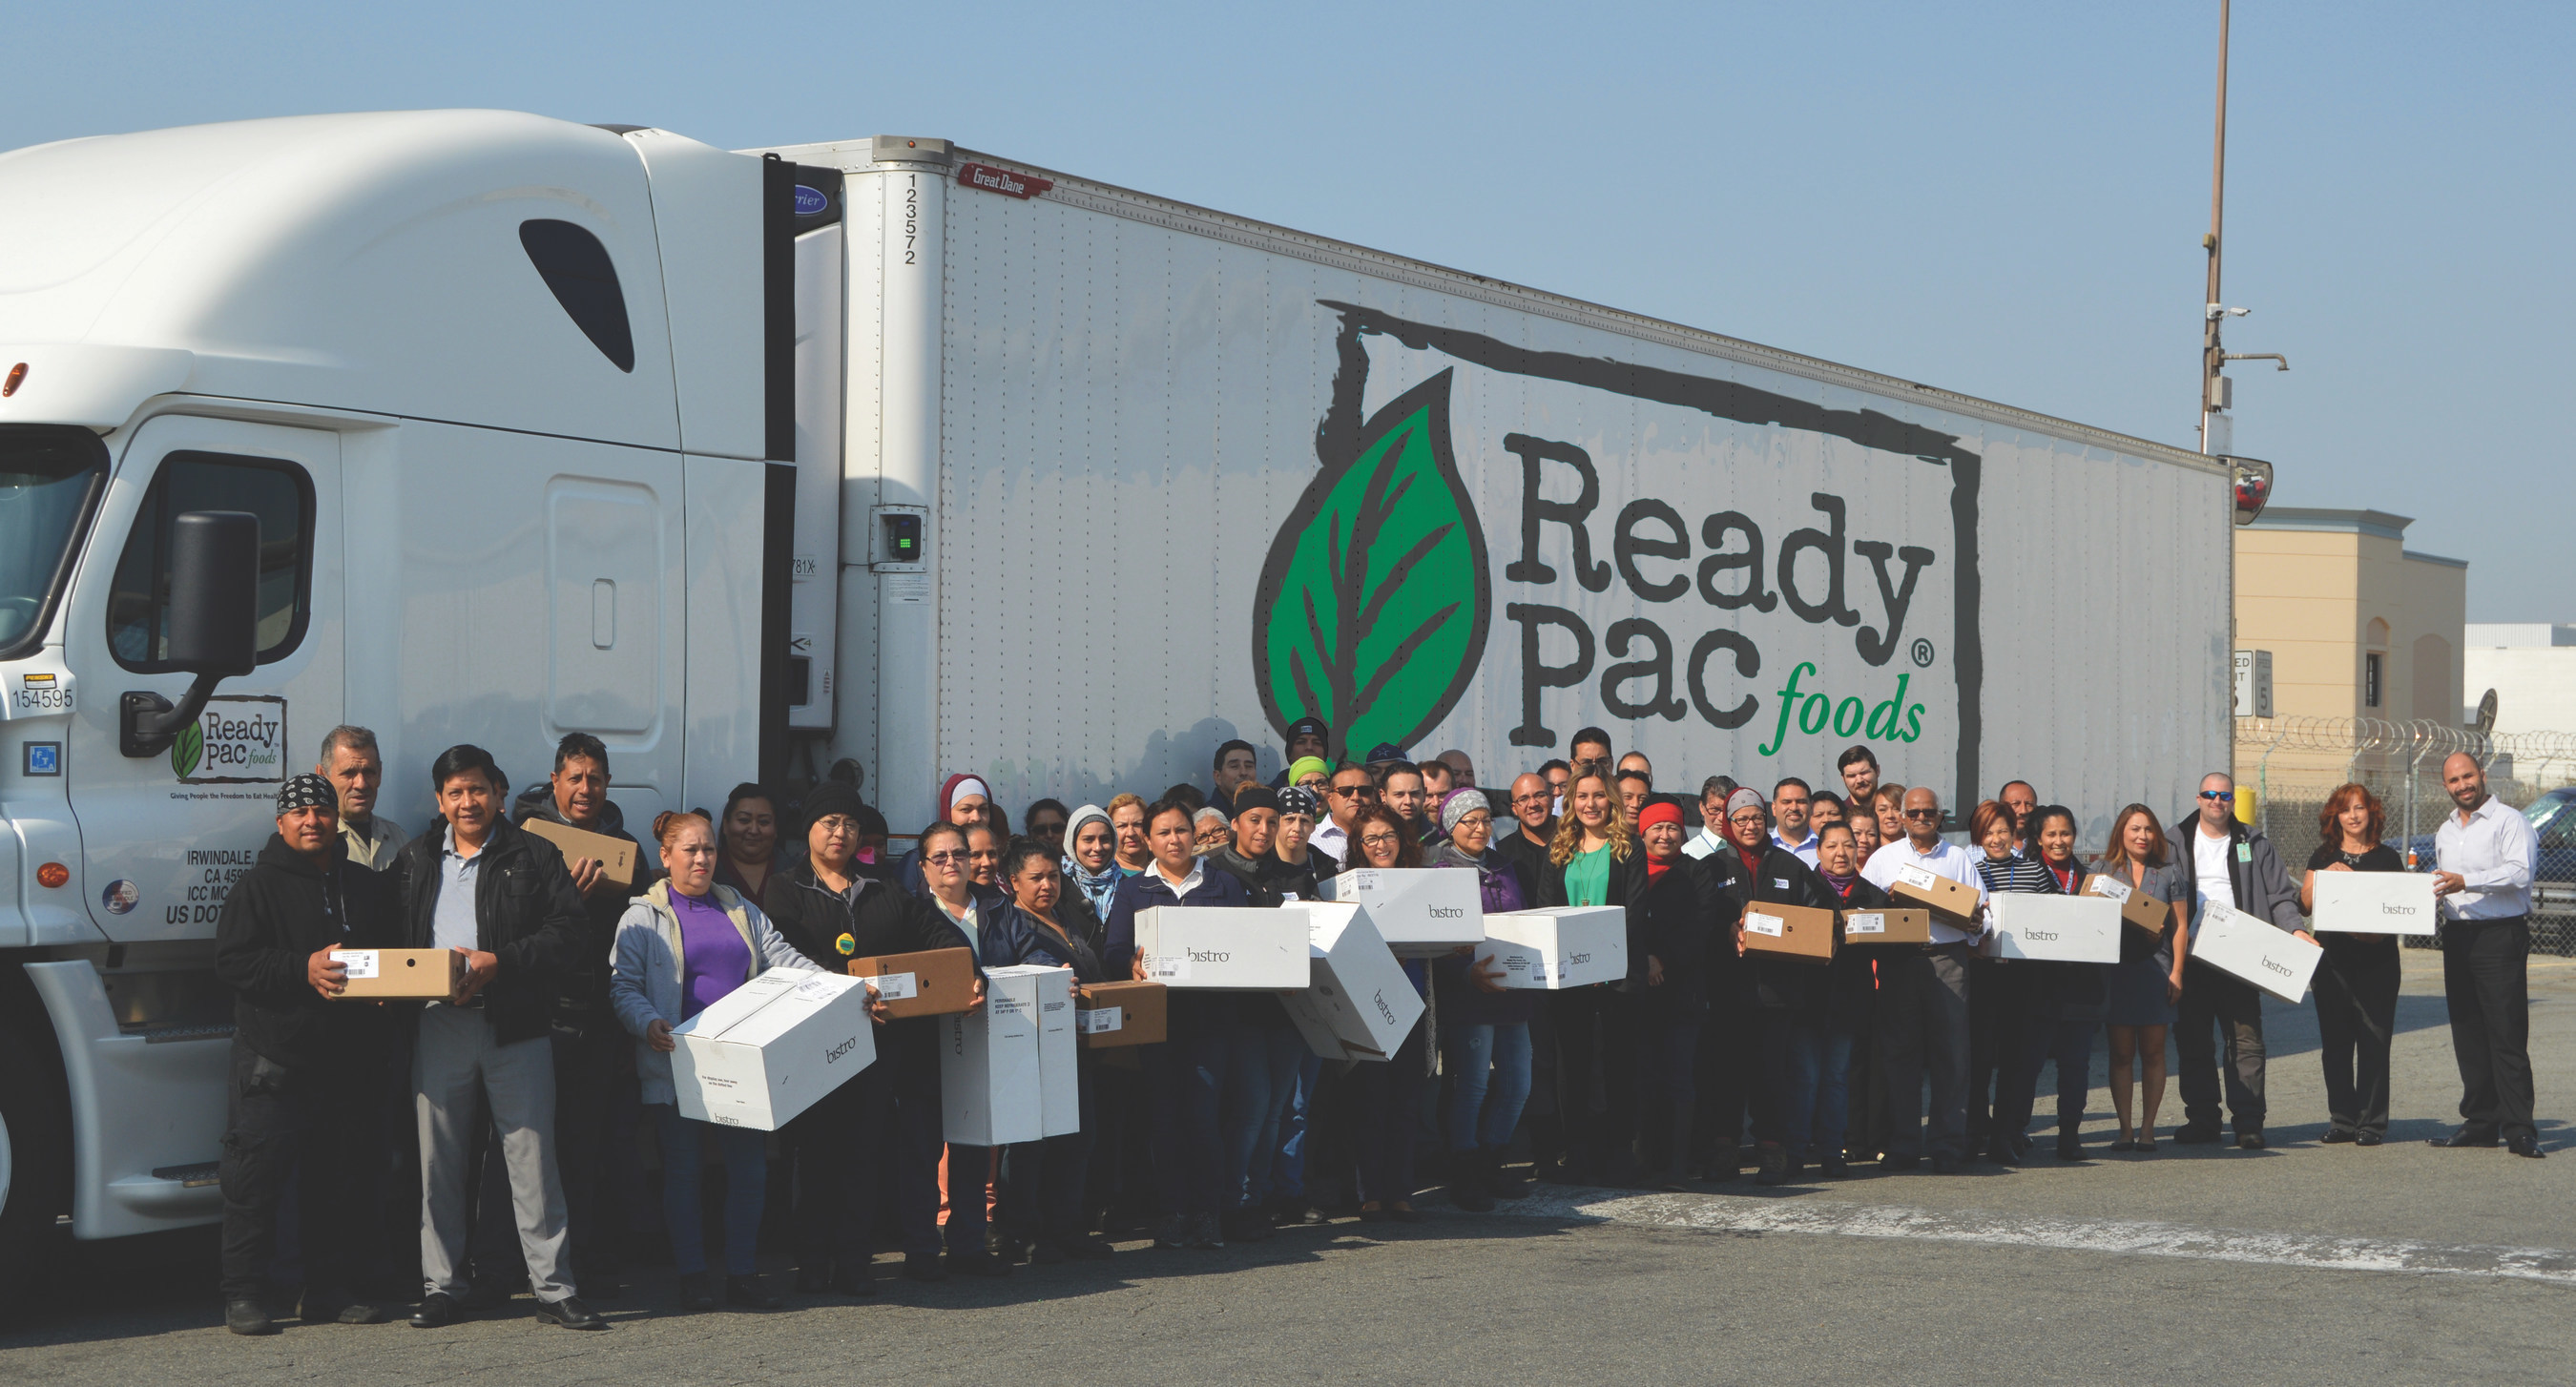 Ready Pac Foods Associates loading 30,000 salads onto truck bound for Baton Rouge, La. Flood victims.